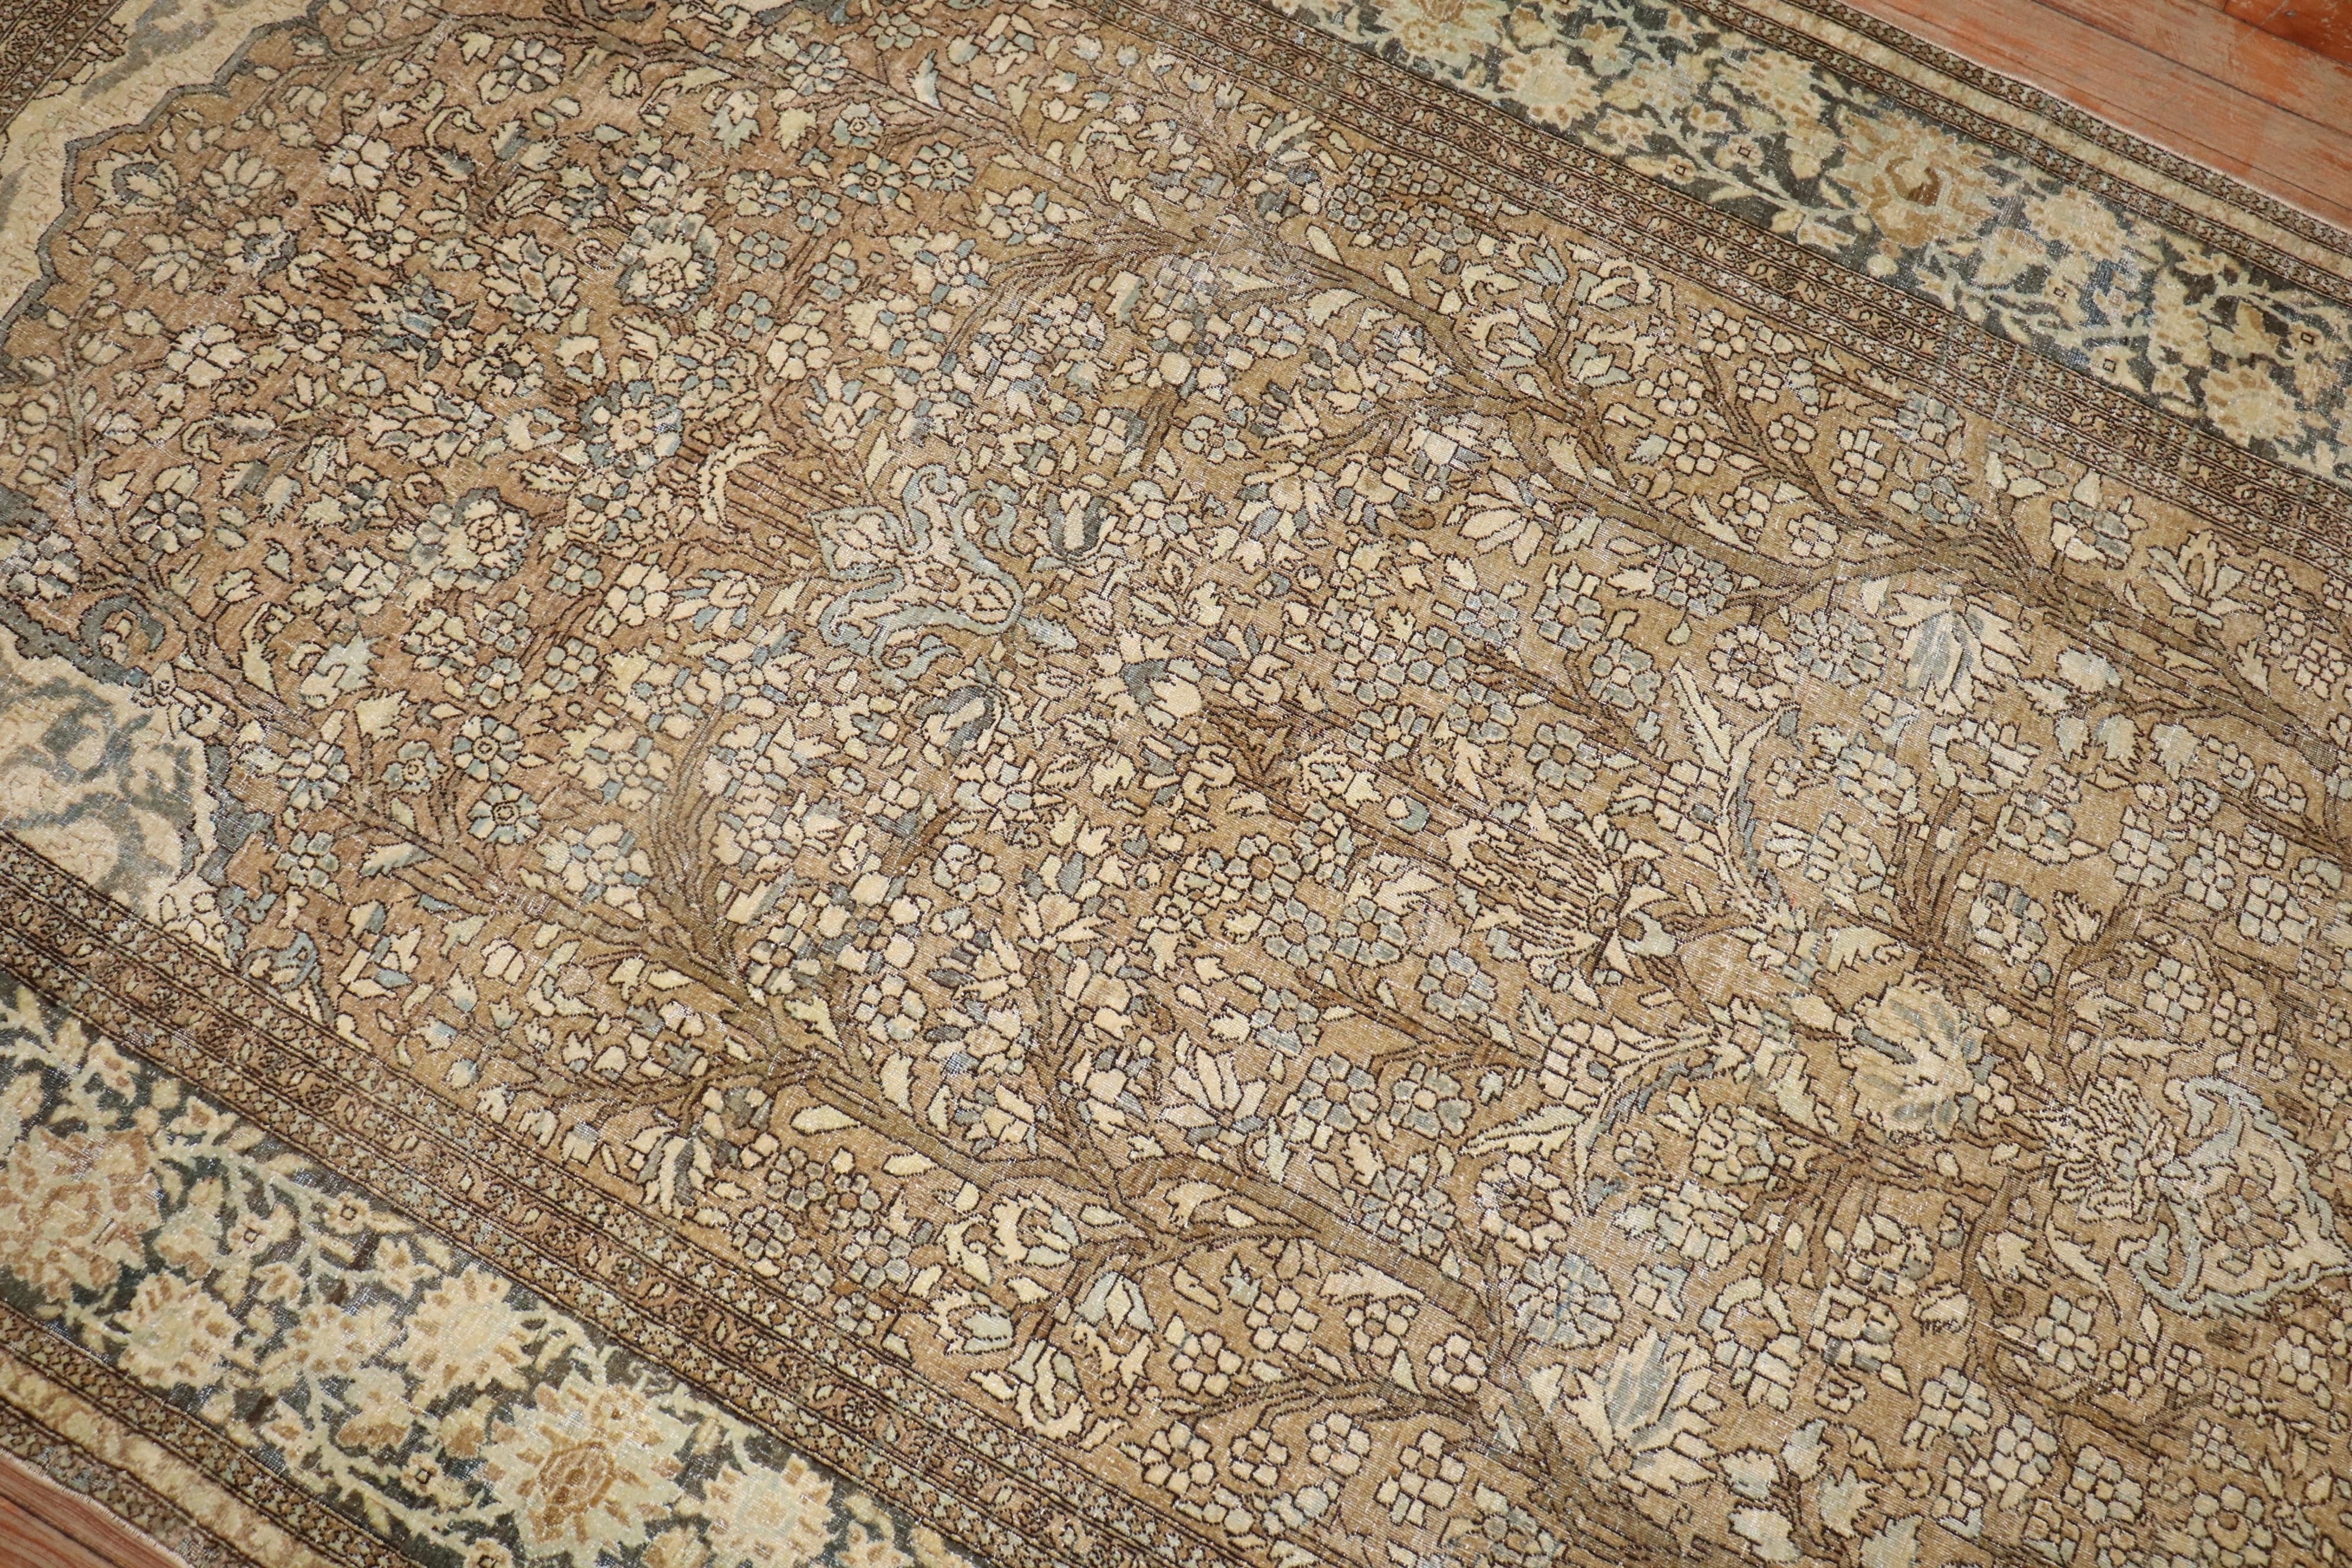 Antique Persian Isfahan Mihrab Prayer Carpet For Sale 2